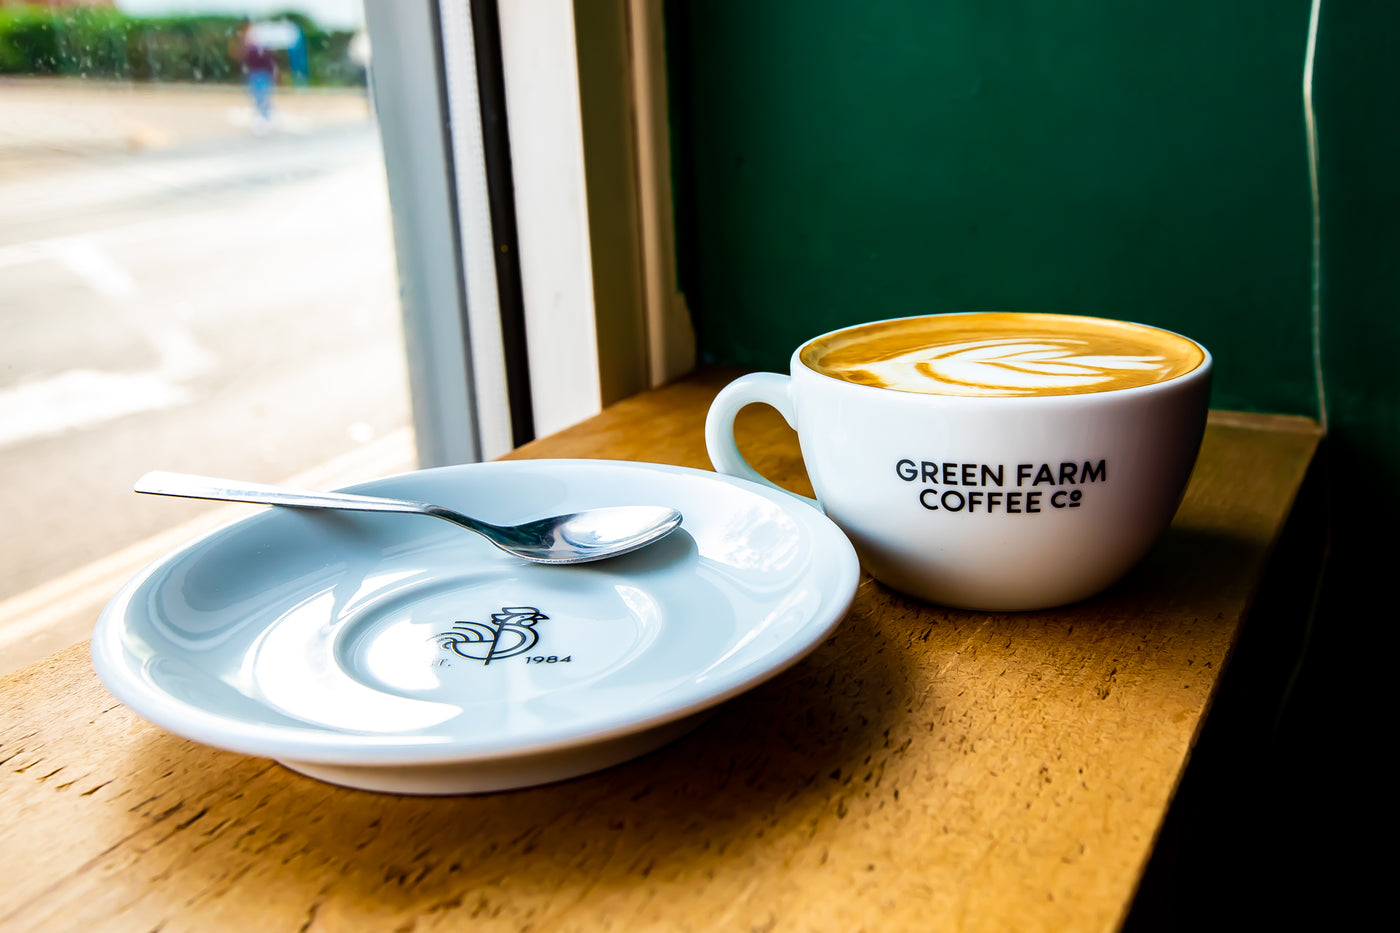 Green Farm Coffee is a premium Norfolk based coffee roastery and a primary partner to Norwich City Football Club.  